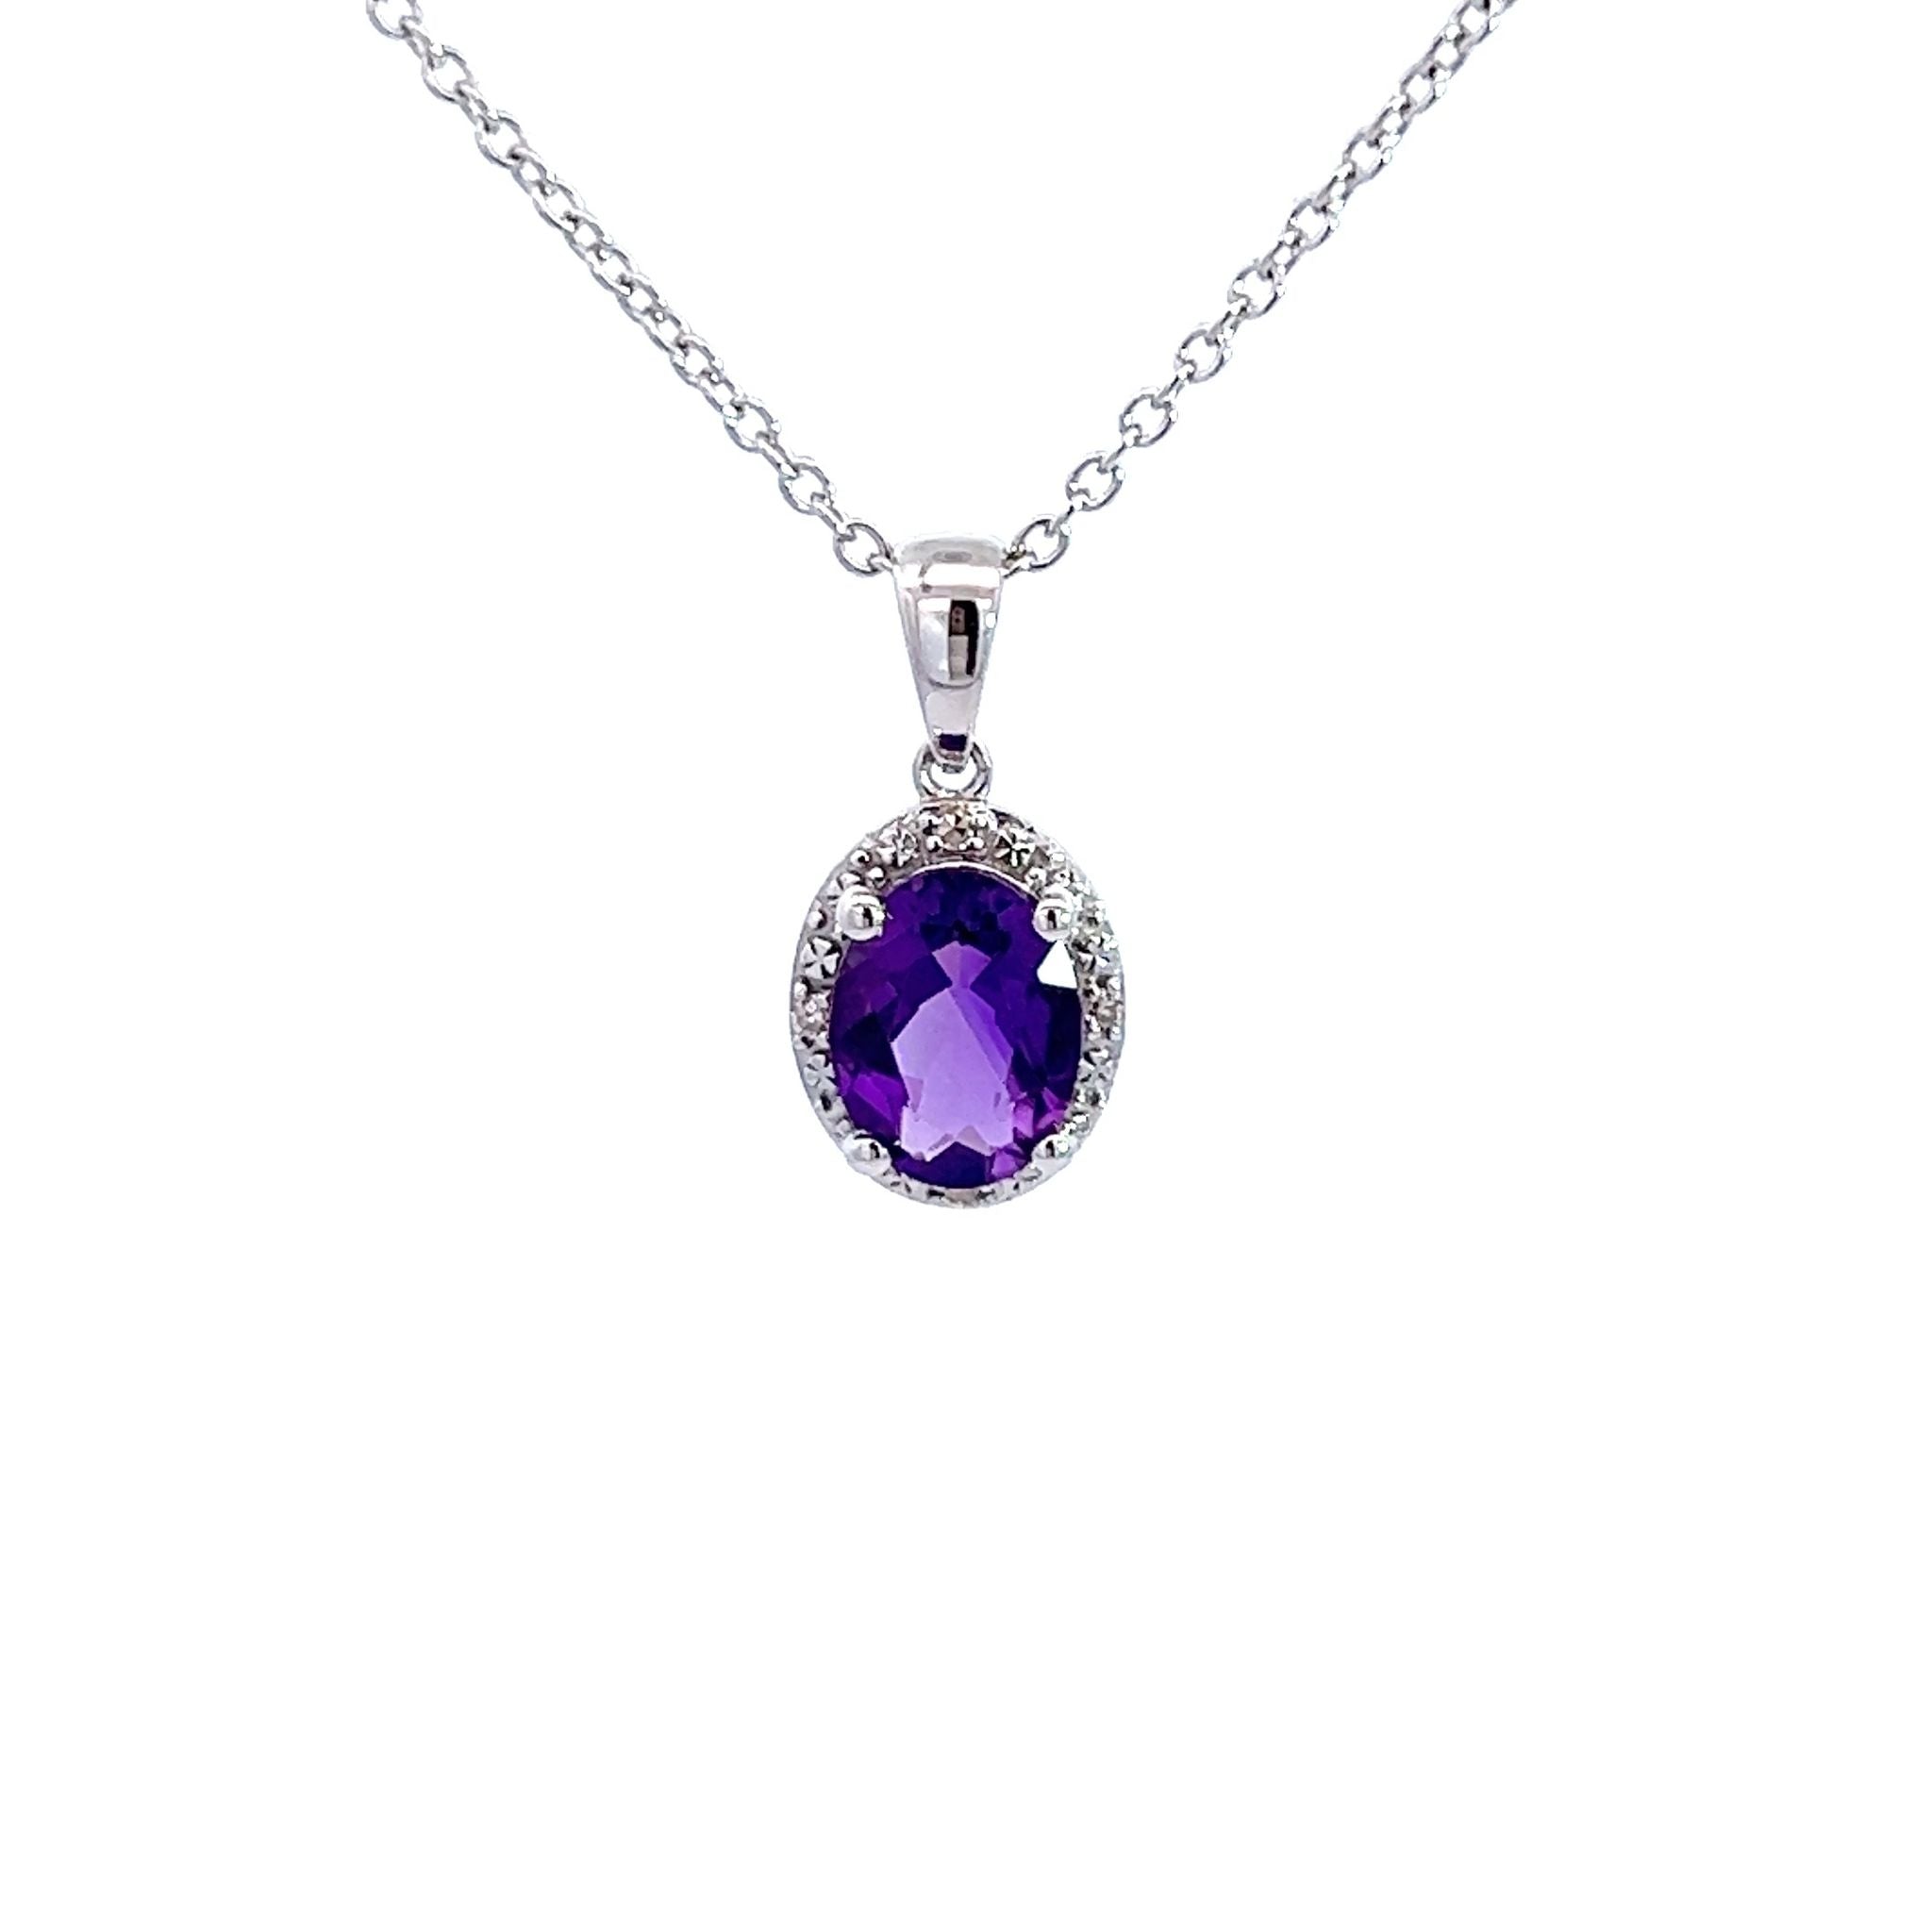 18ct White Gold Necklace with Amethyst & Diamond Pendant - Correani Design  - Artifacts World